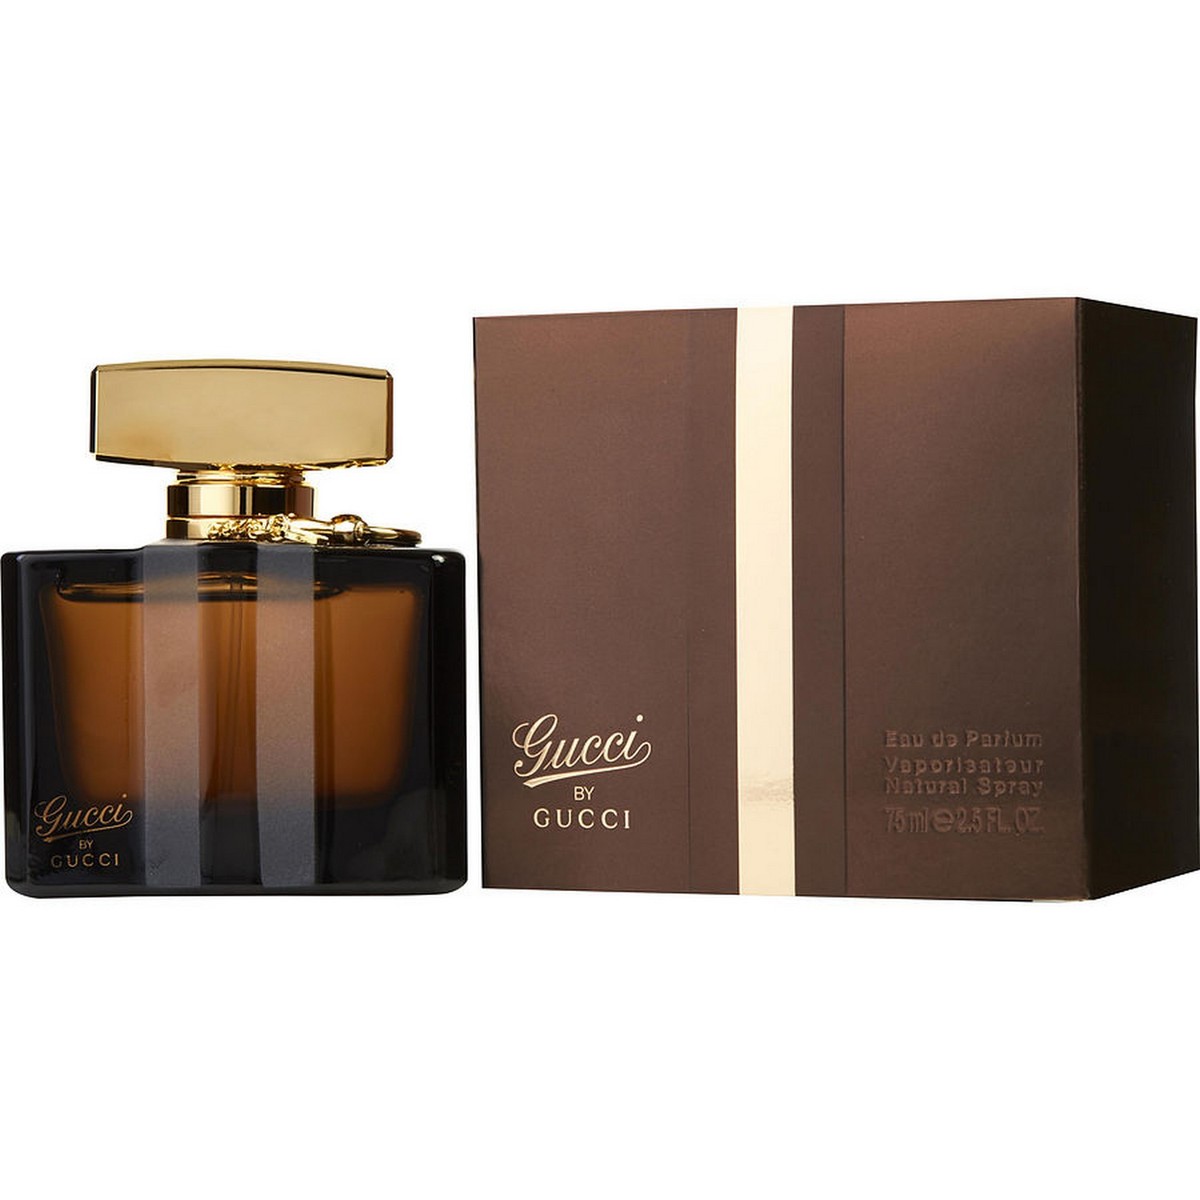 Gucci By Gucci EDP for Women 75ml